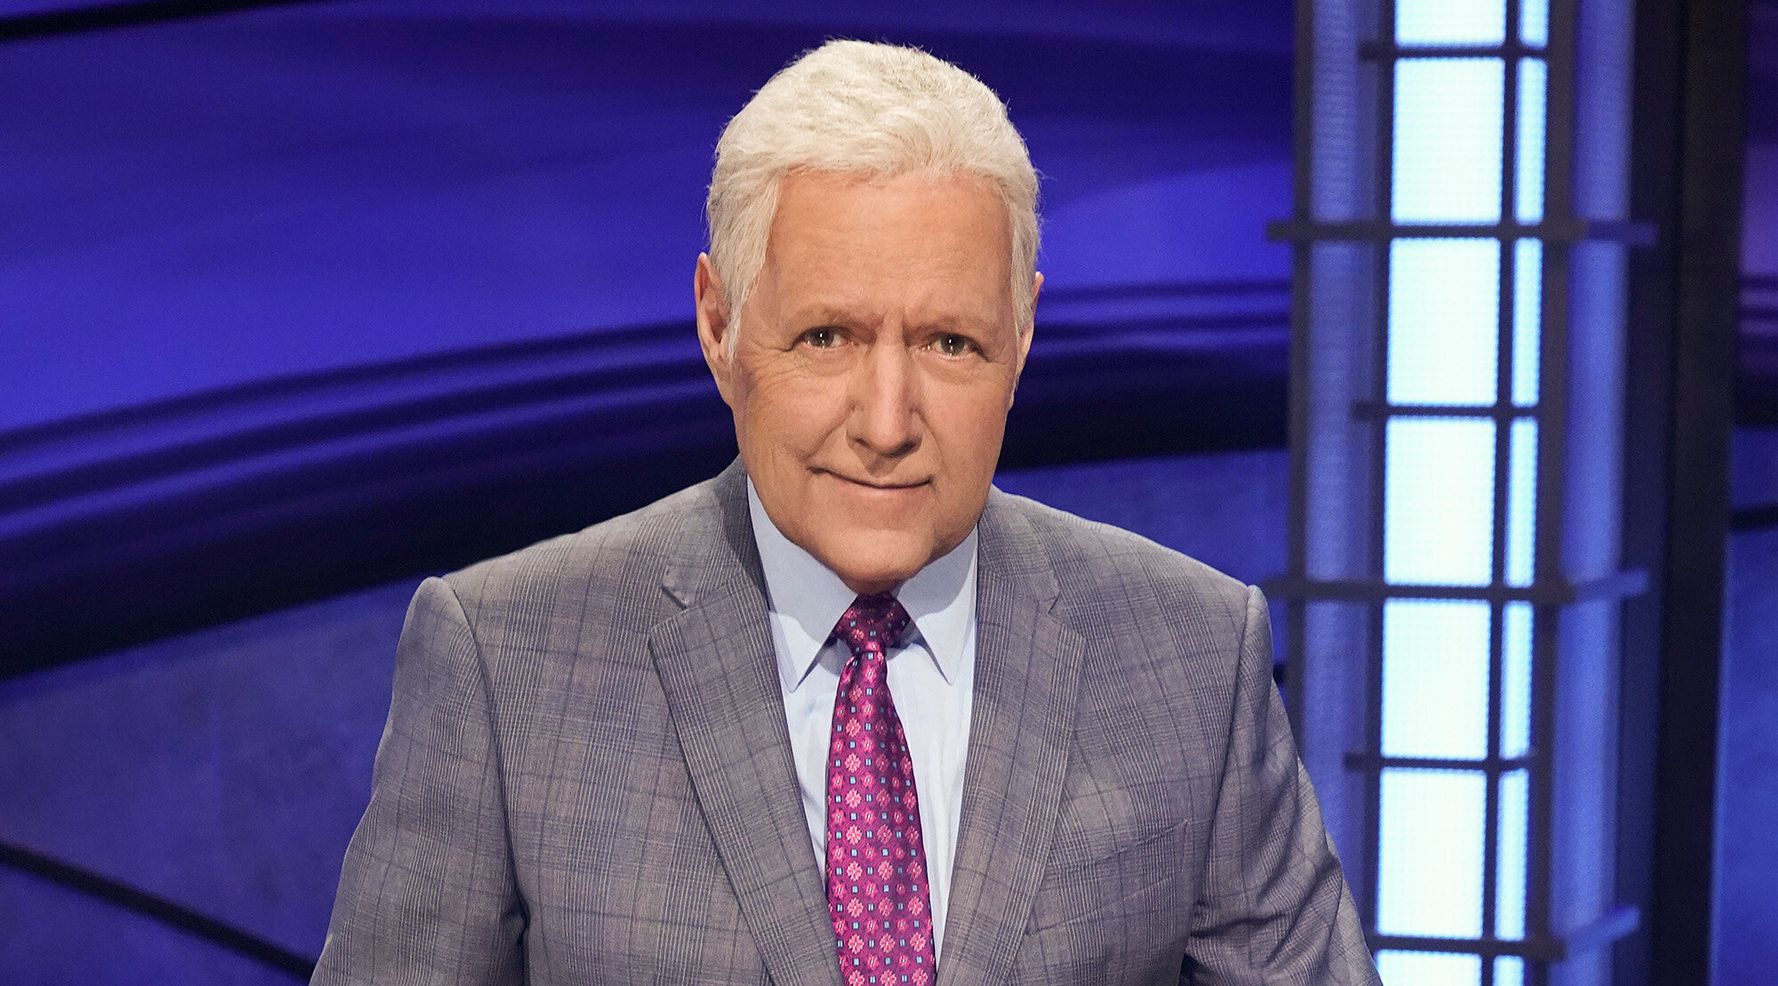 One Of Alex Trebek’s Greatest Gifts Was Connecting Grandkids And Grandparents